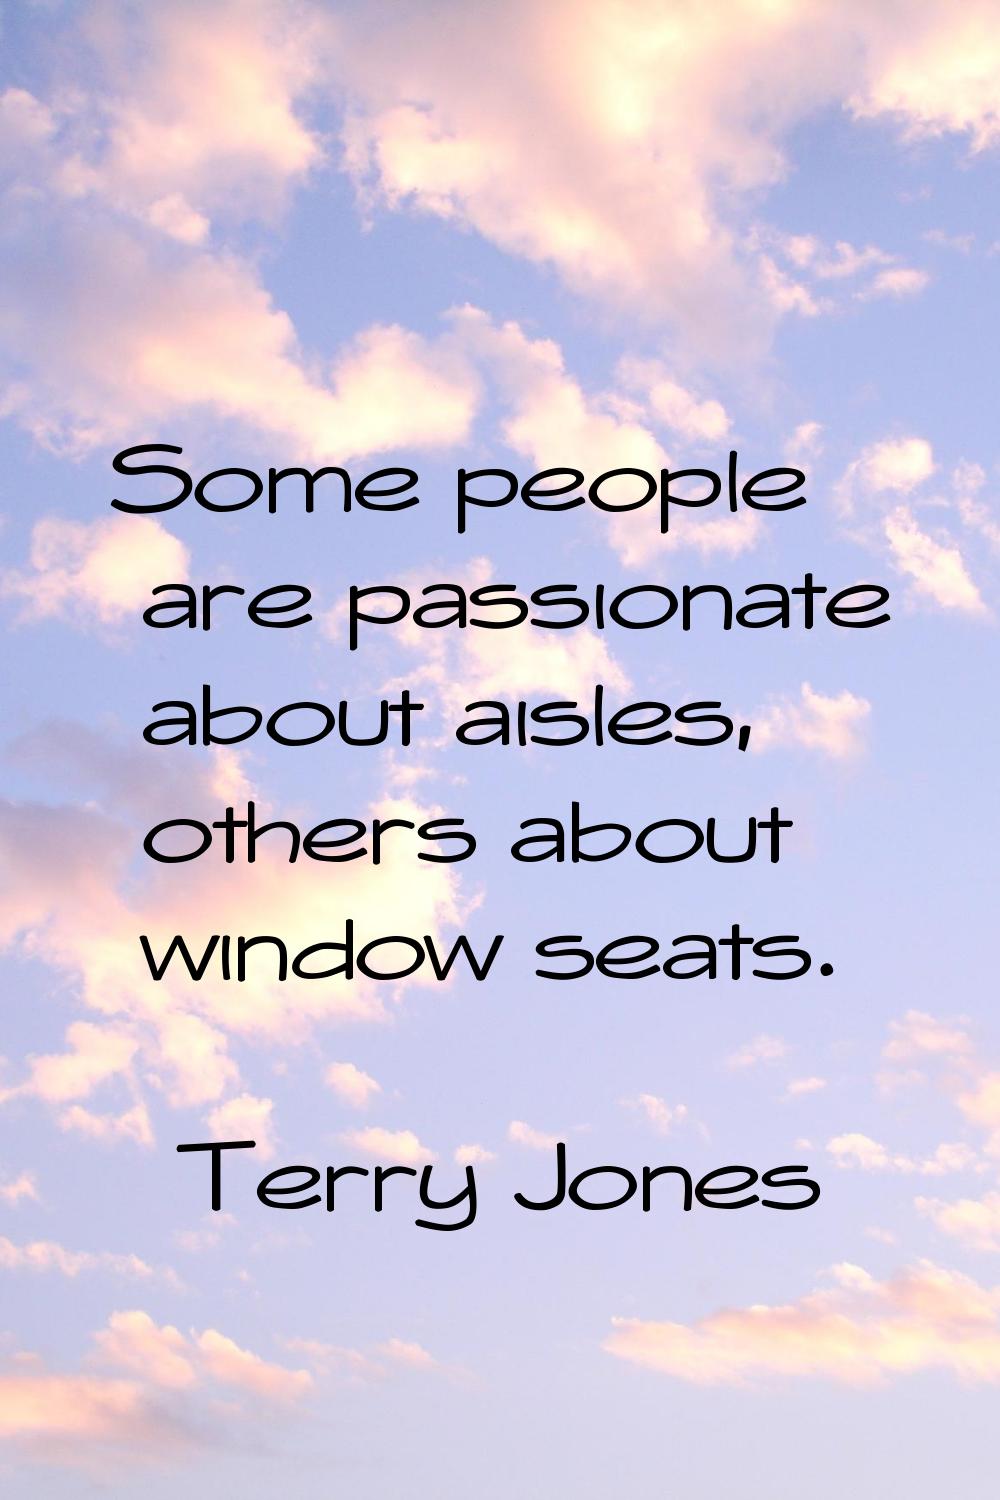 Some people are passionate about aisles, others about window seats.